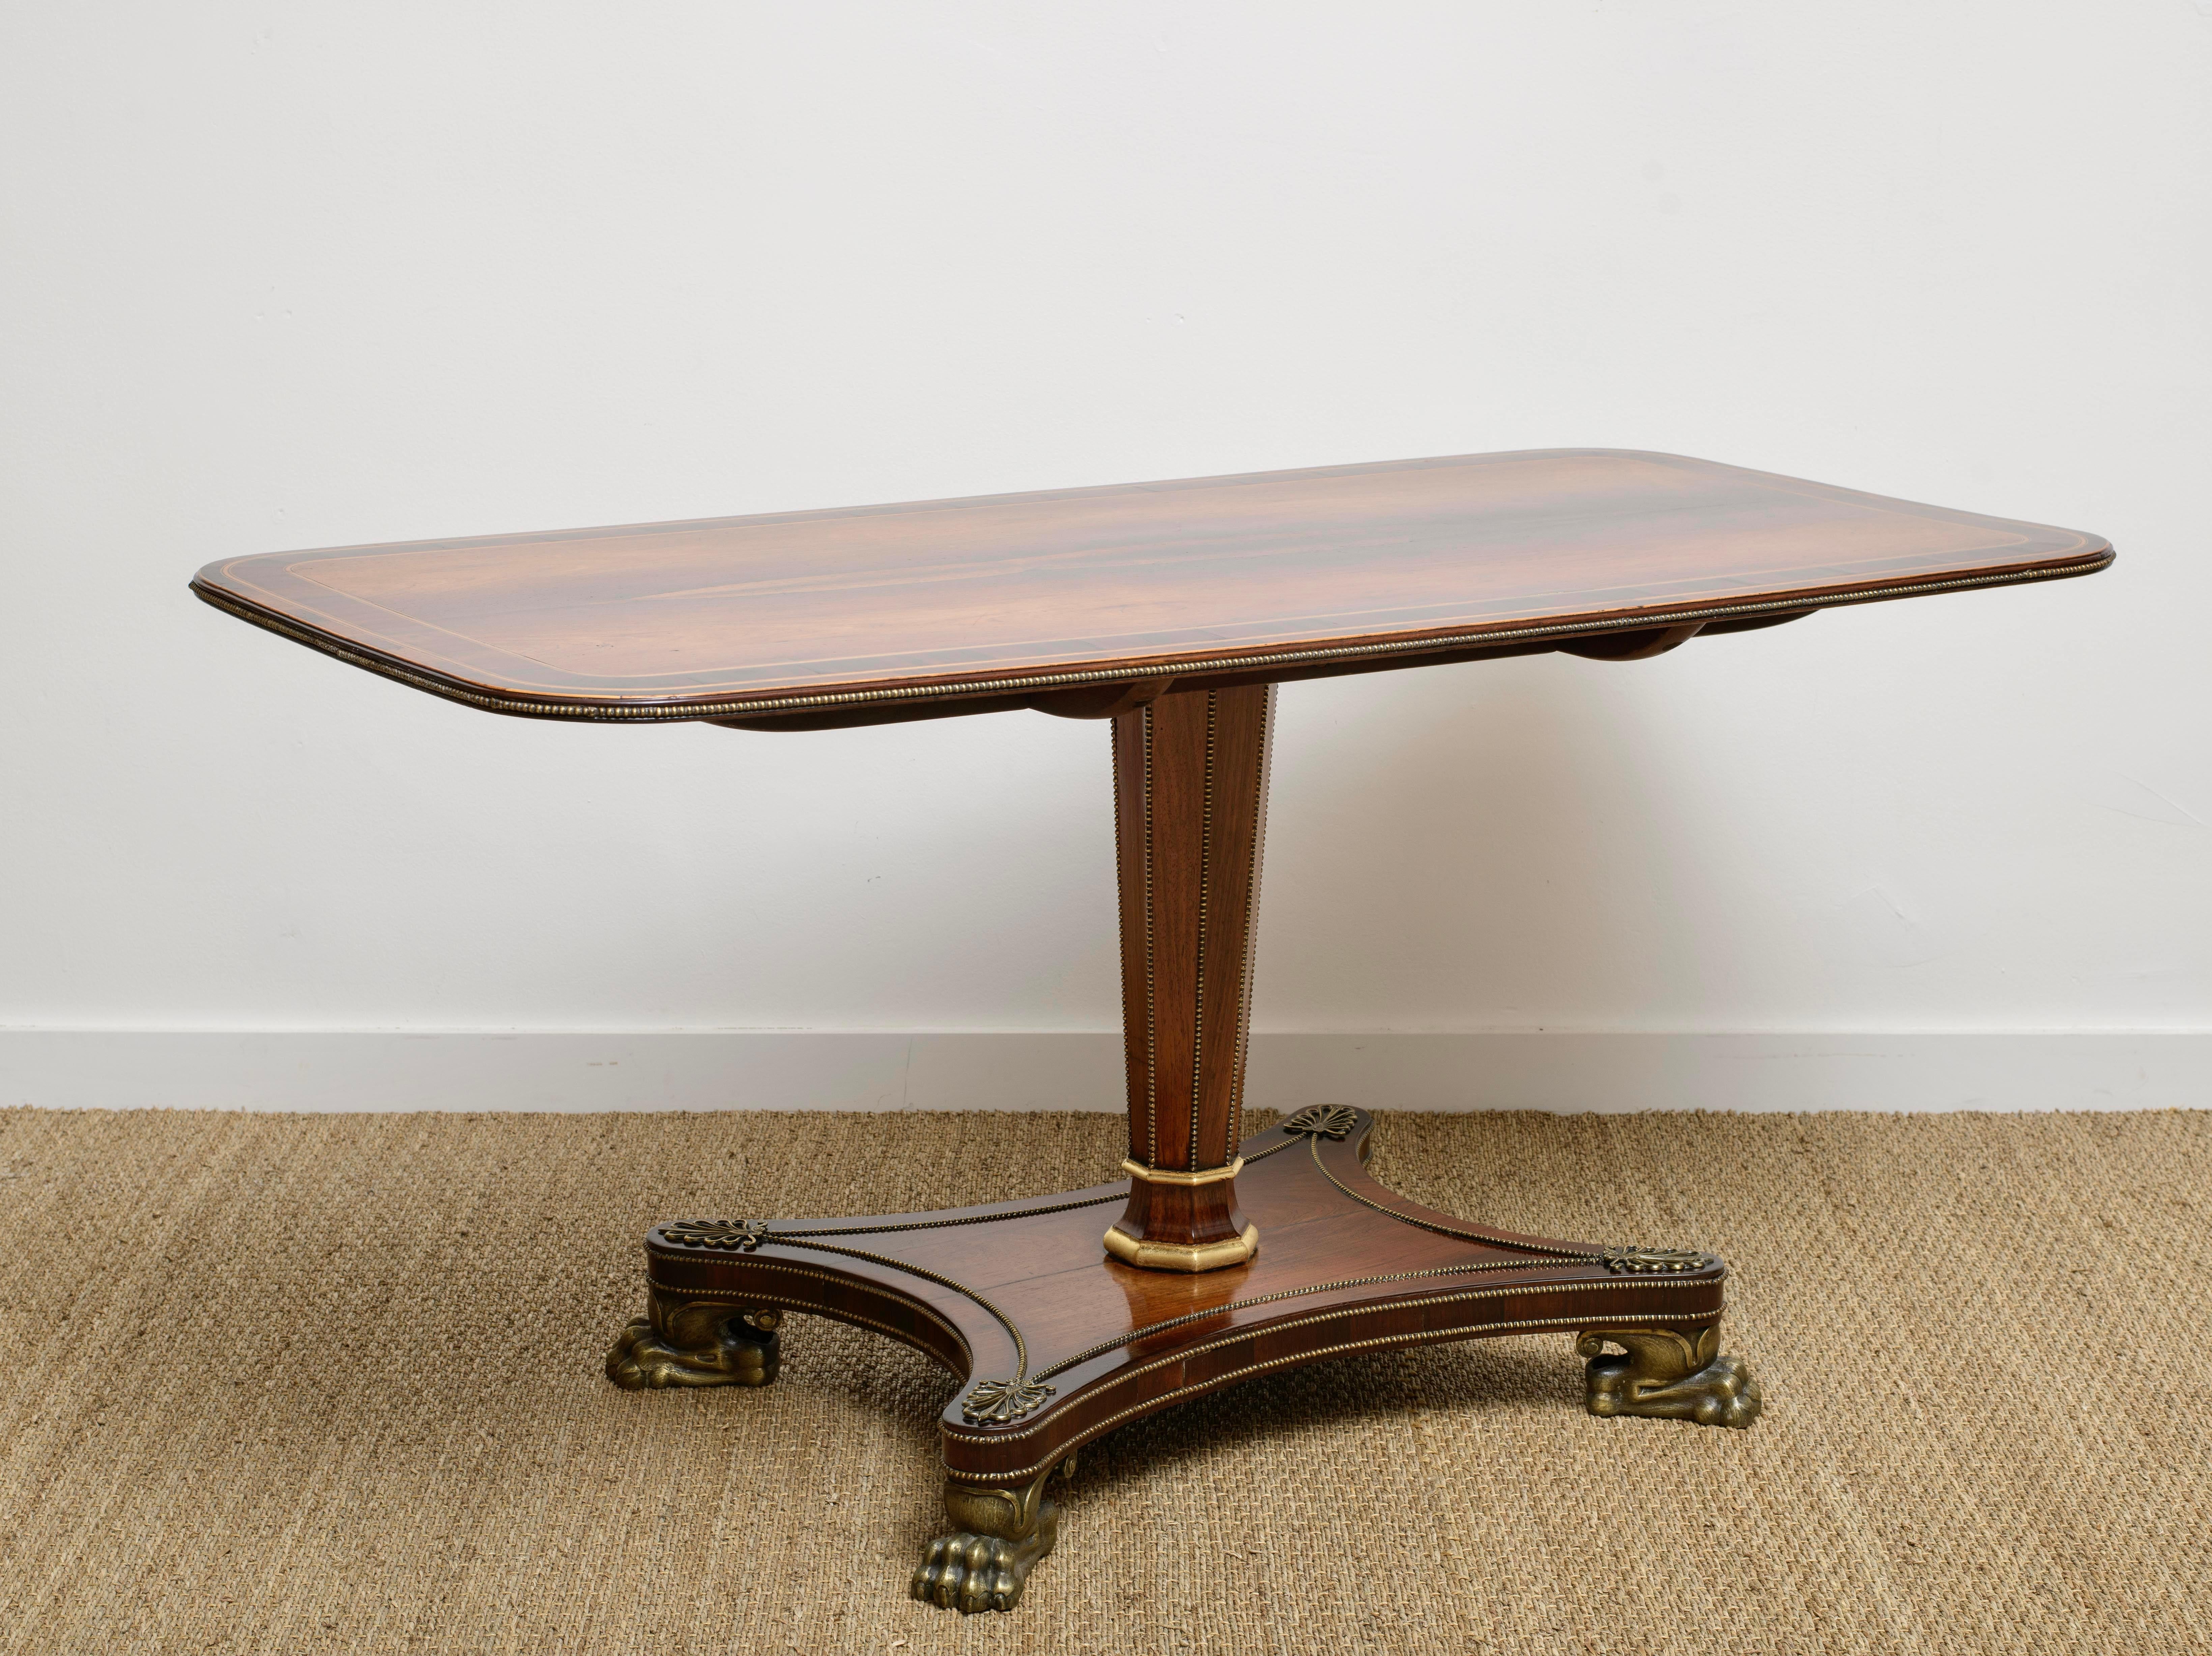 Early 19th C. Regency Period Rosewood and Beaded Brass inlay Breakfast Table In Good Condition For Sale In Santa Barbara, CA